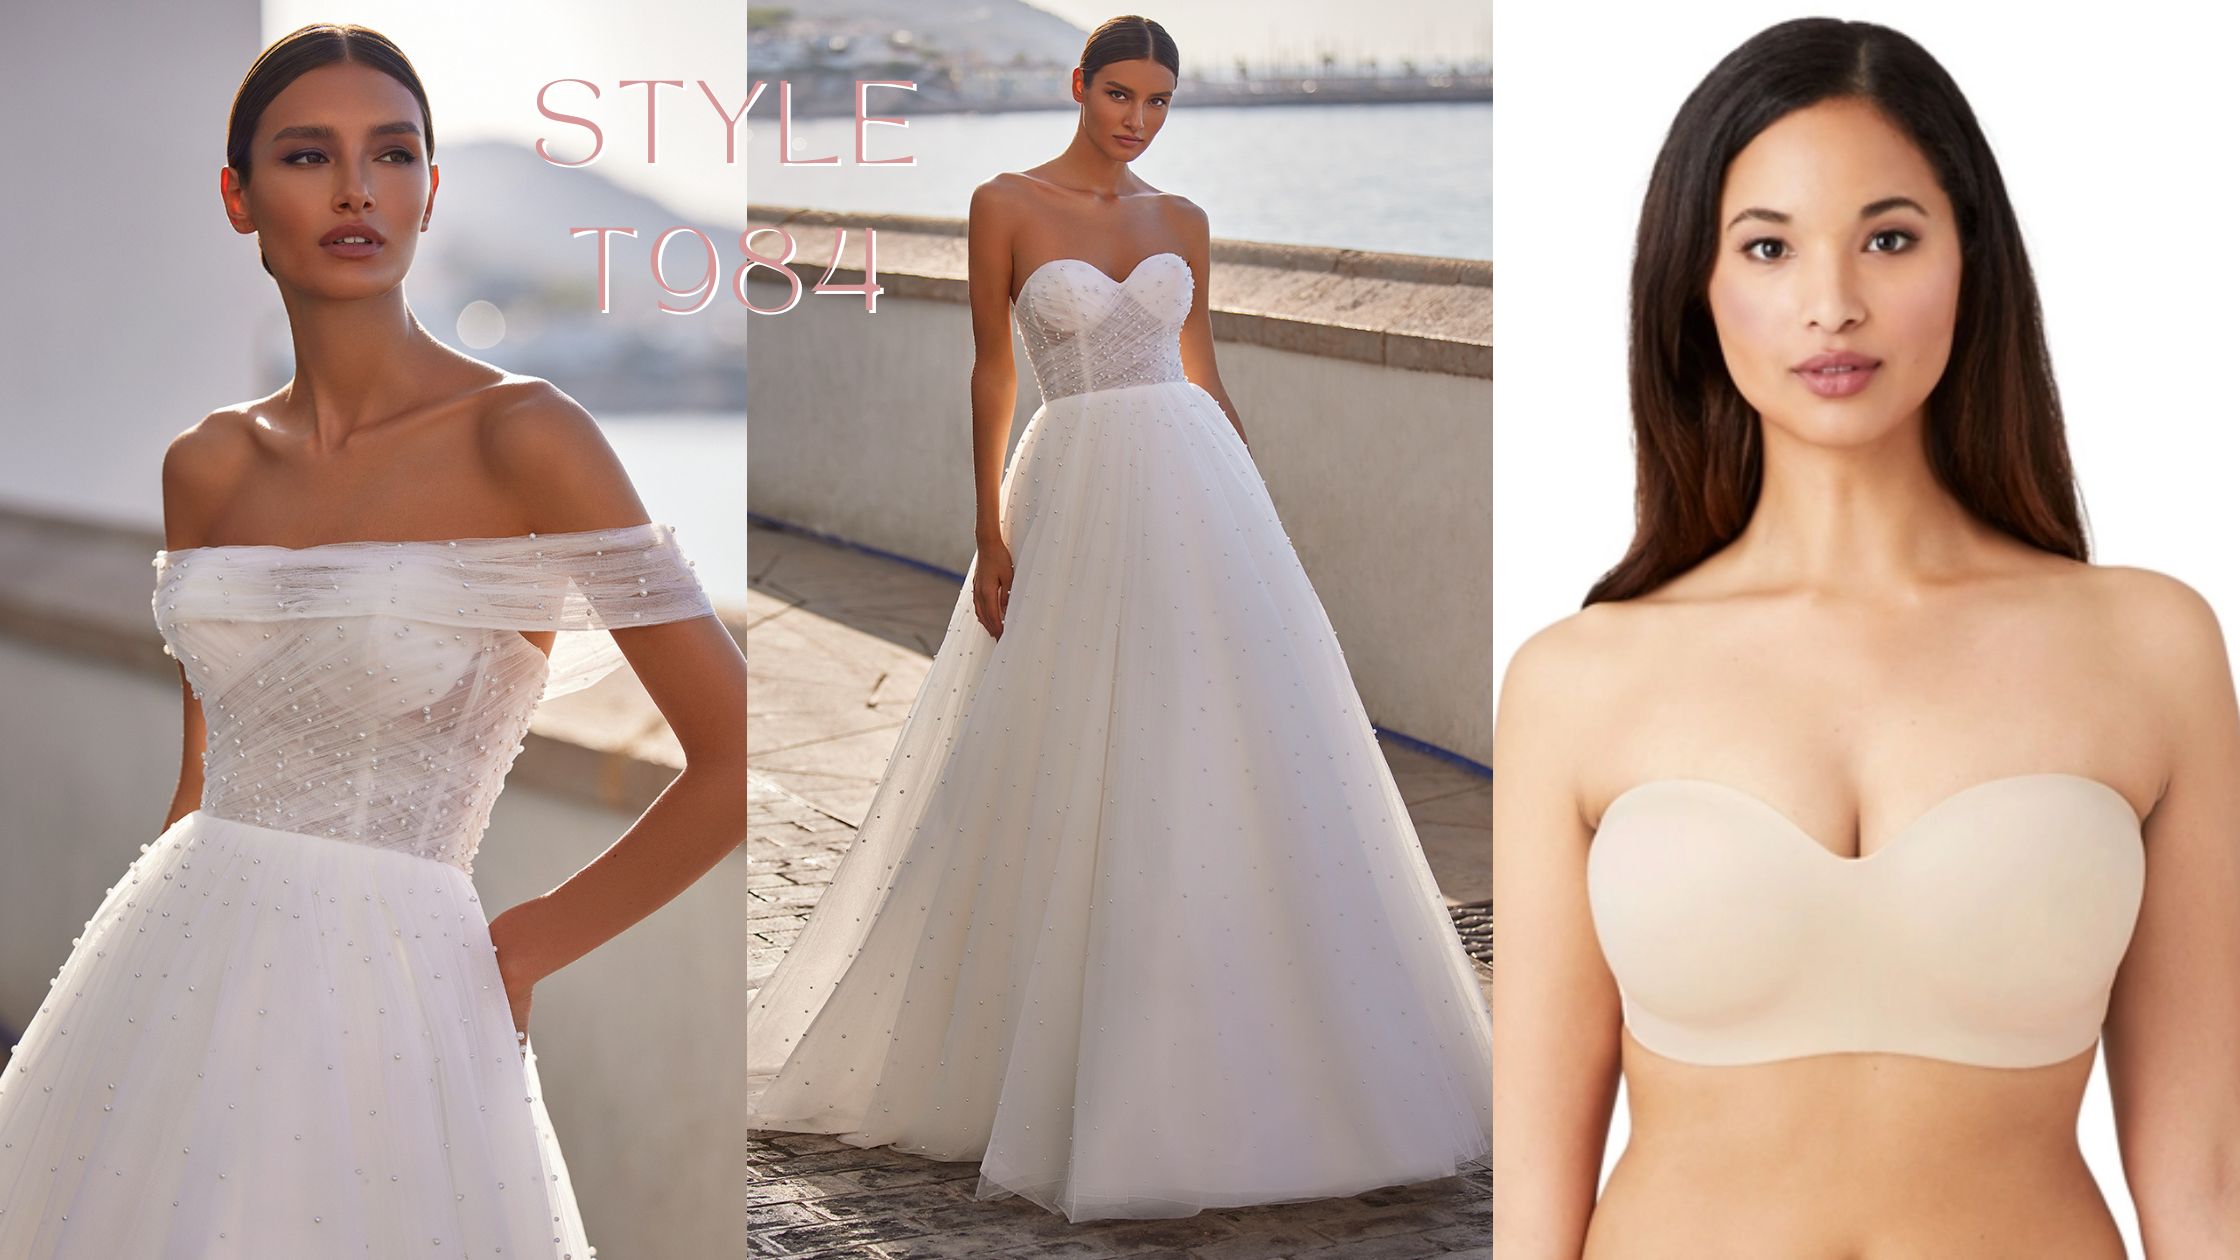 Woman wearing  a strapless wedding dress and a woman wearing a strapless bra that would work with this dress style